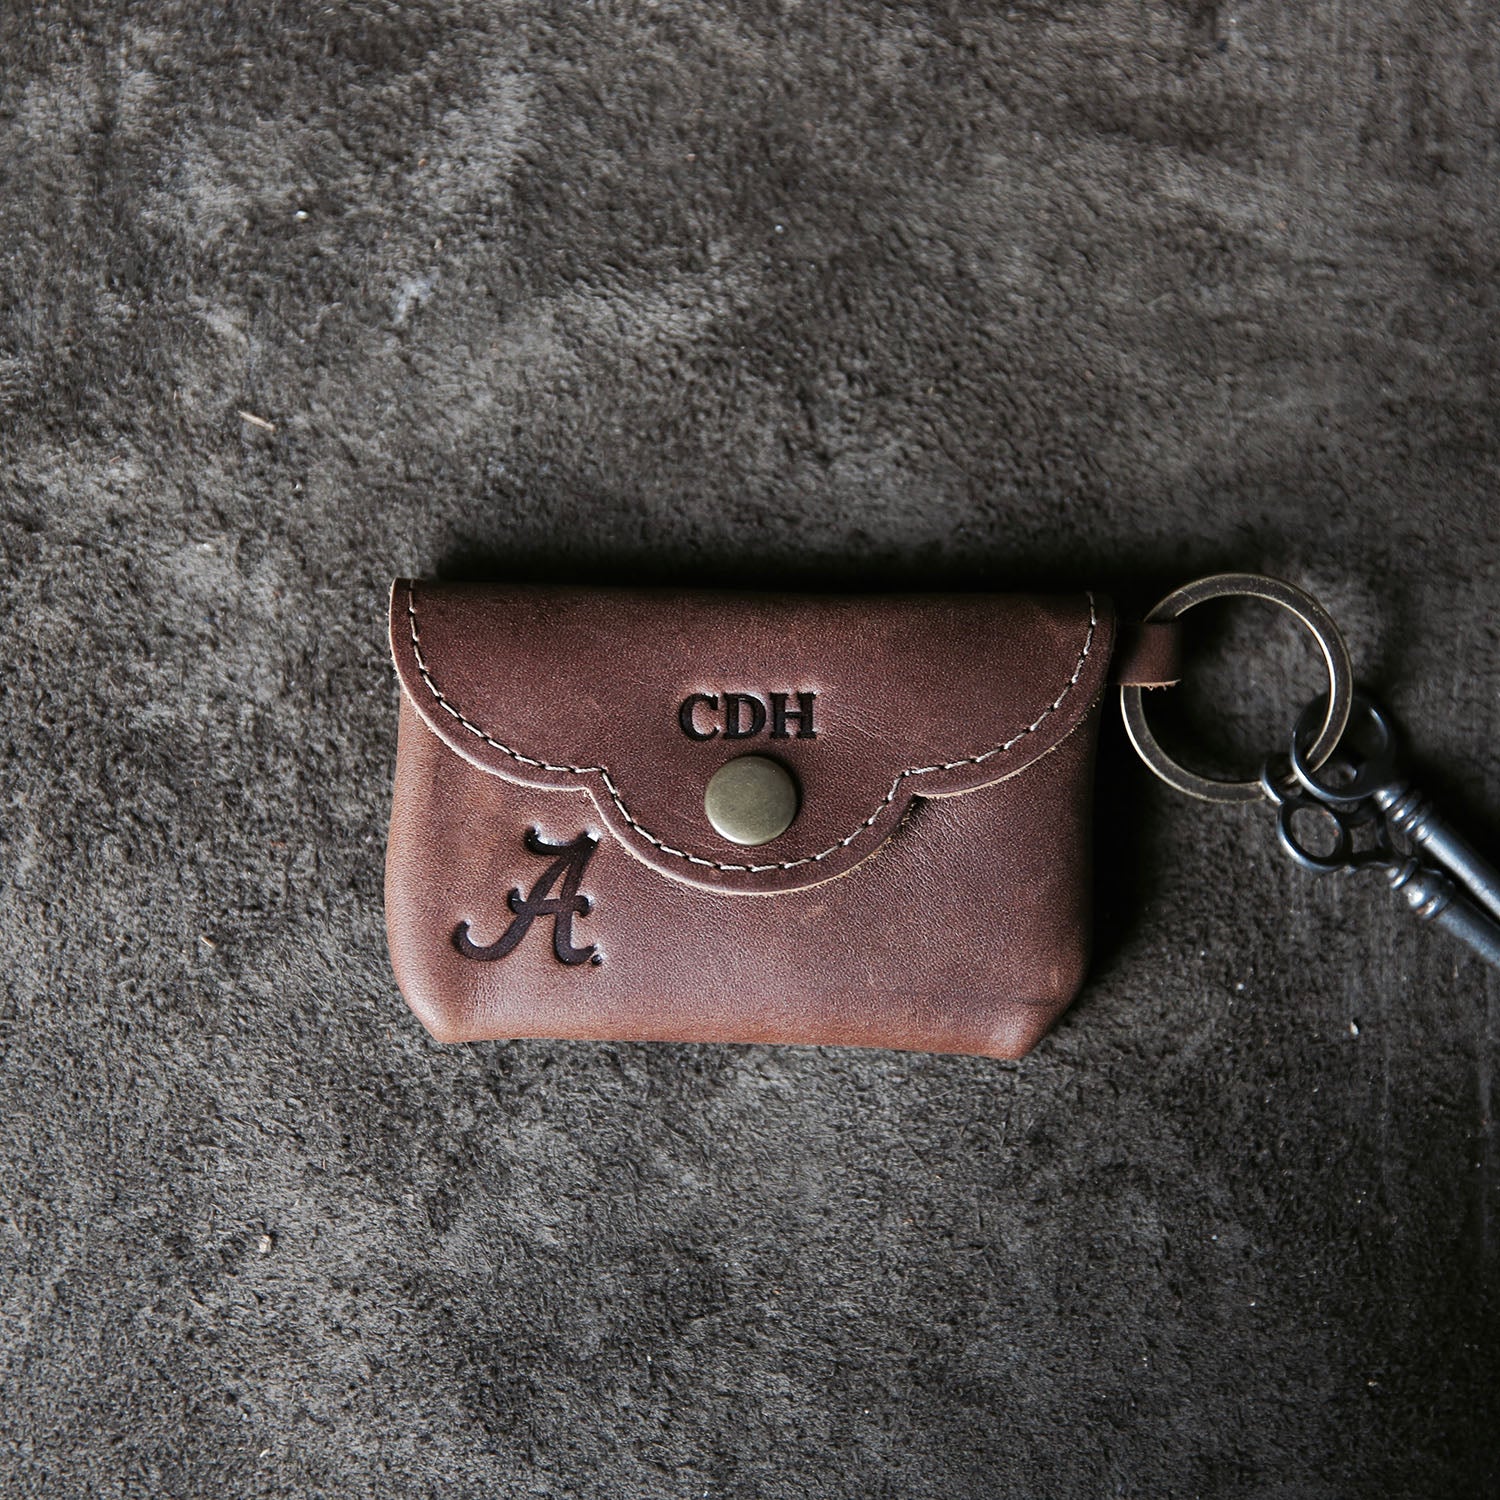 Fine leather scallop keychain wallet with personalized initials and Alabama logo